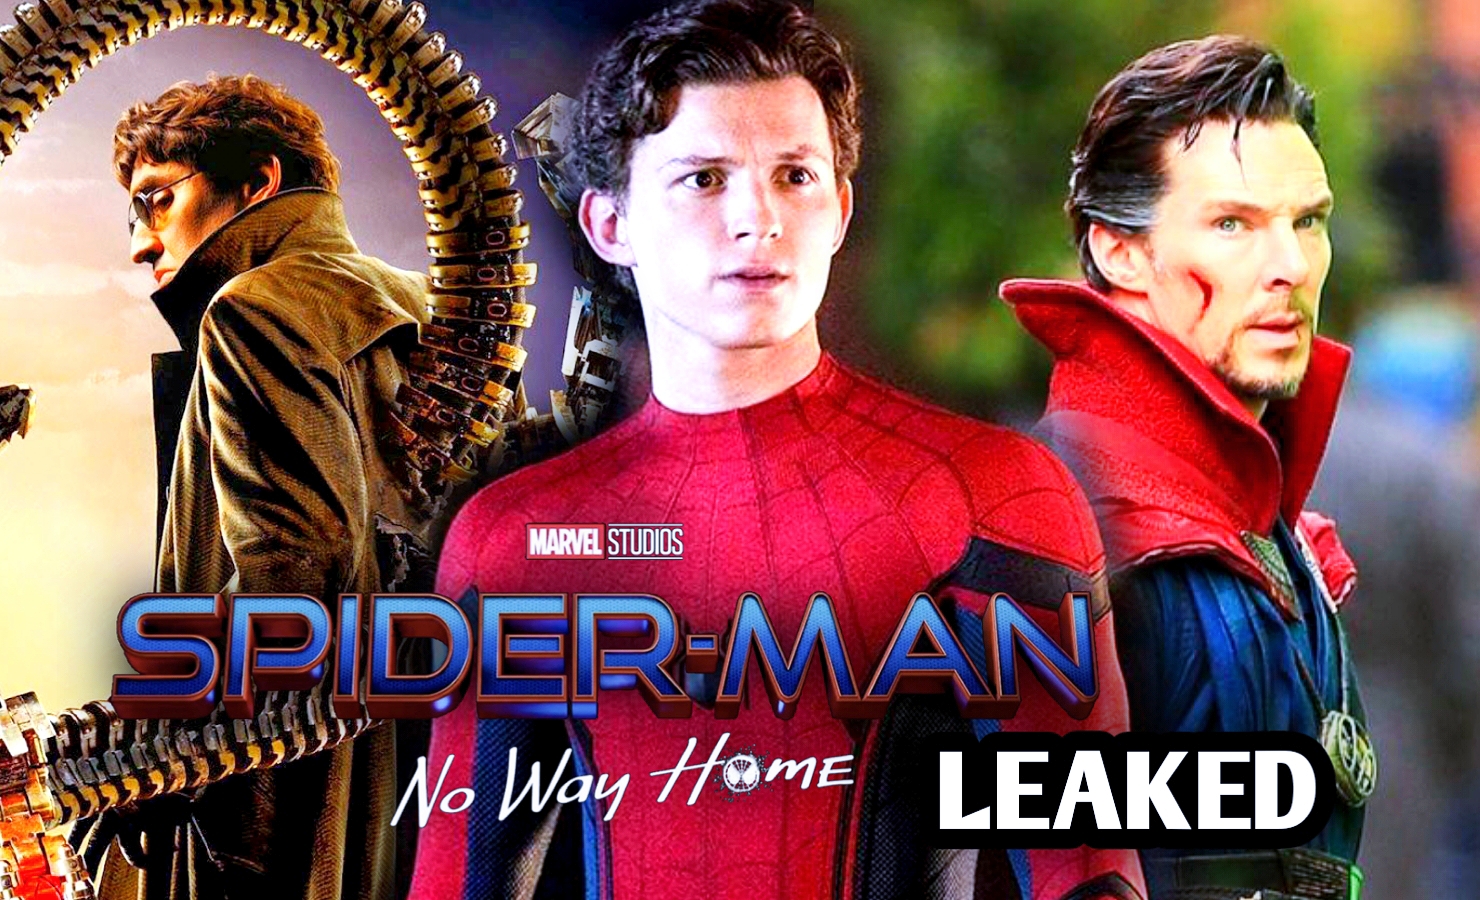 Spider-Man: No Way Home Trailer Leaked Online, Sony In Action